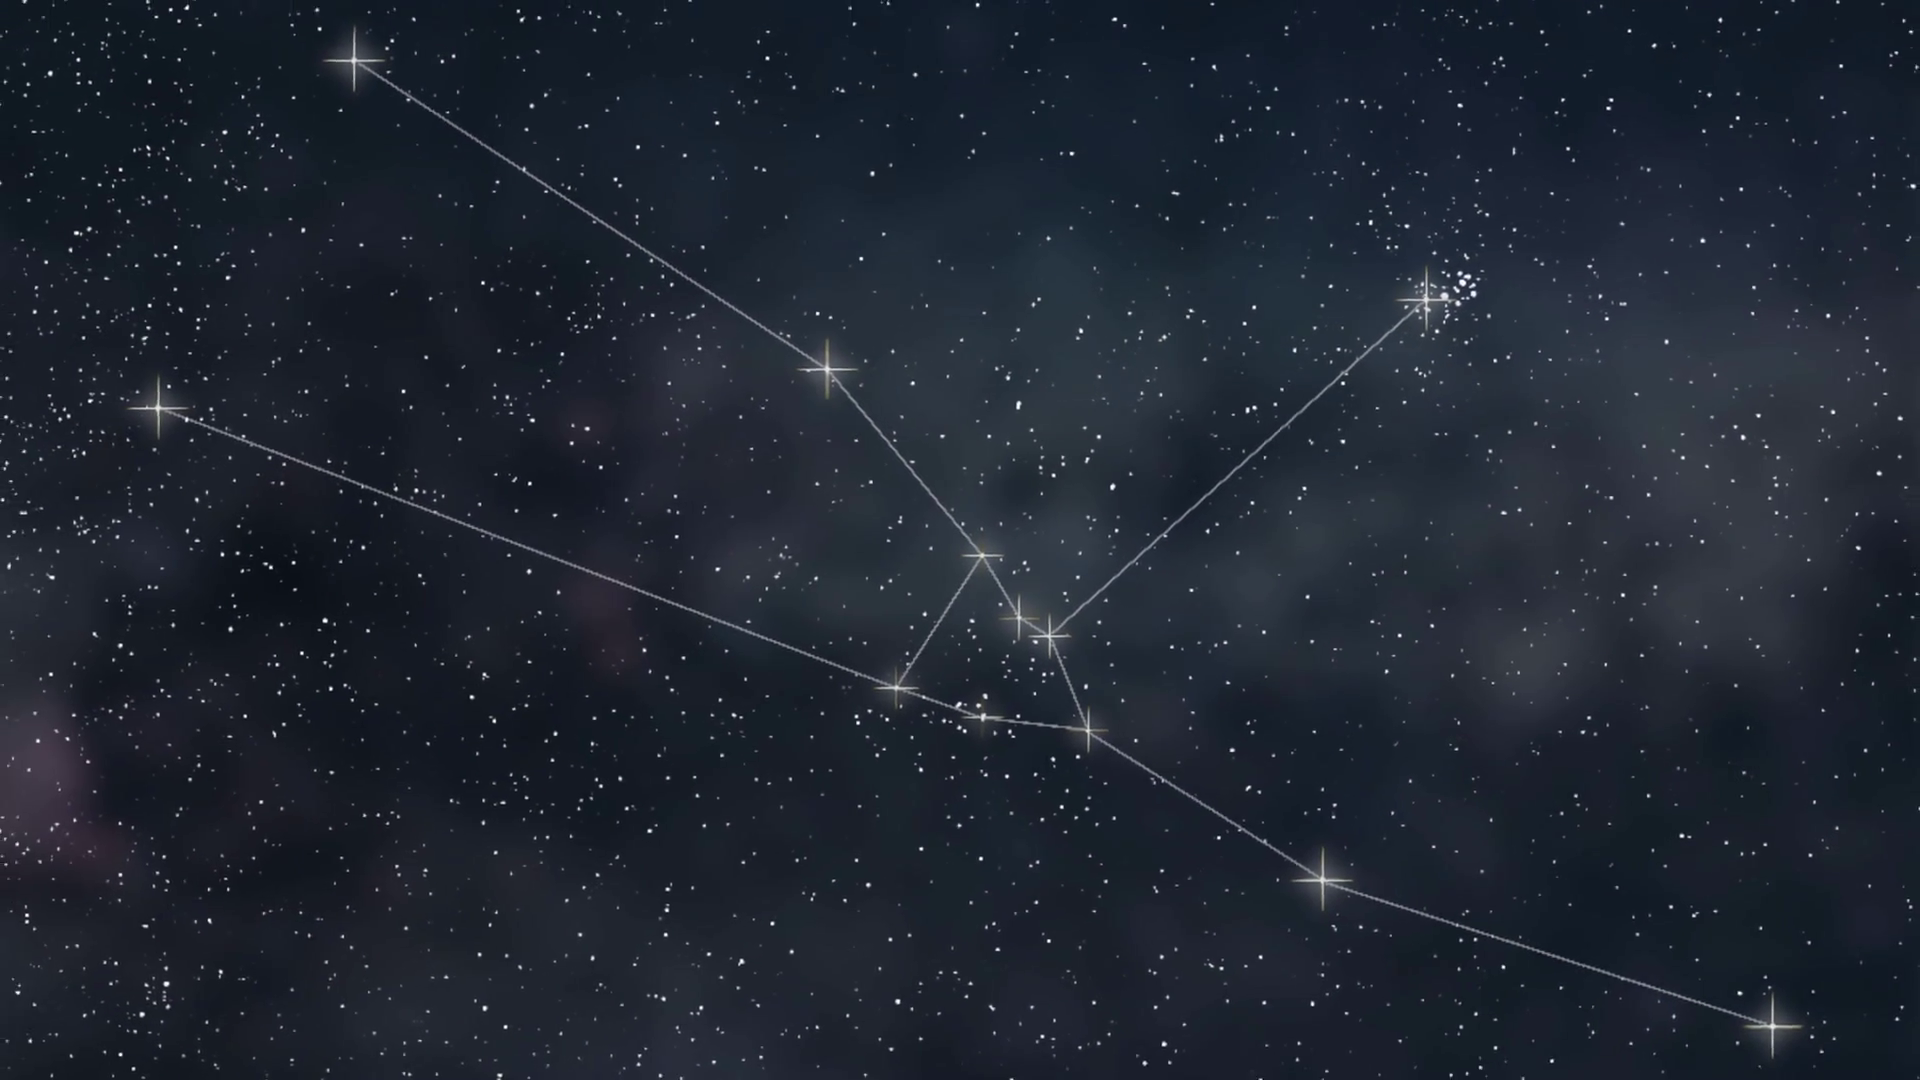 taurus-constellation-zodiac-sign-taurus-constellation-lines_hrb8osydx_thumbnail-full13.png